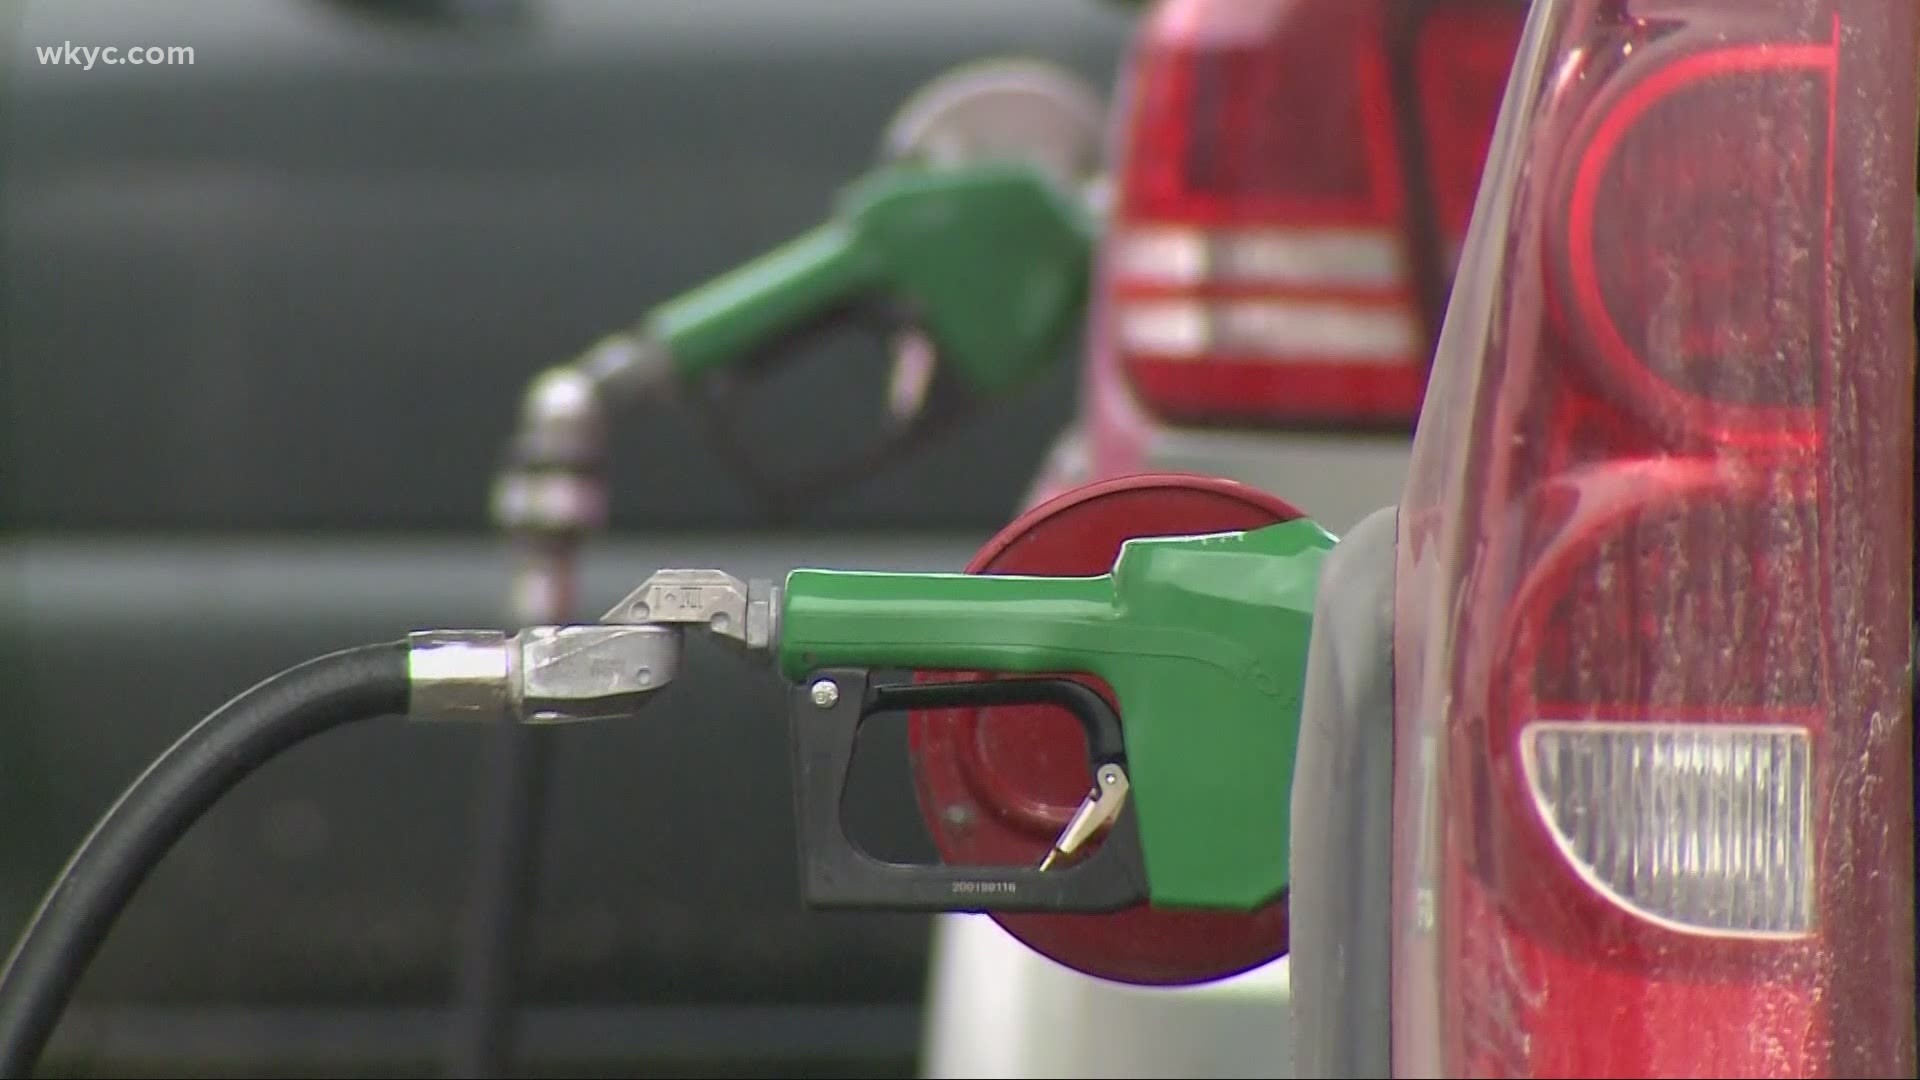 If you've been feeling the pain at the pump, you're not alone. The national average for a gallon of gas is surging to $3.15 a gallon.